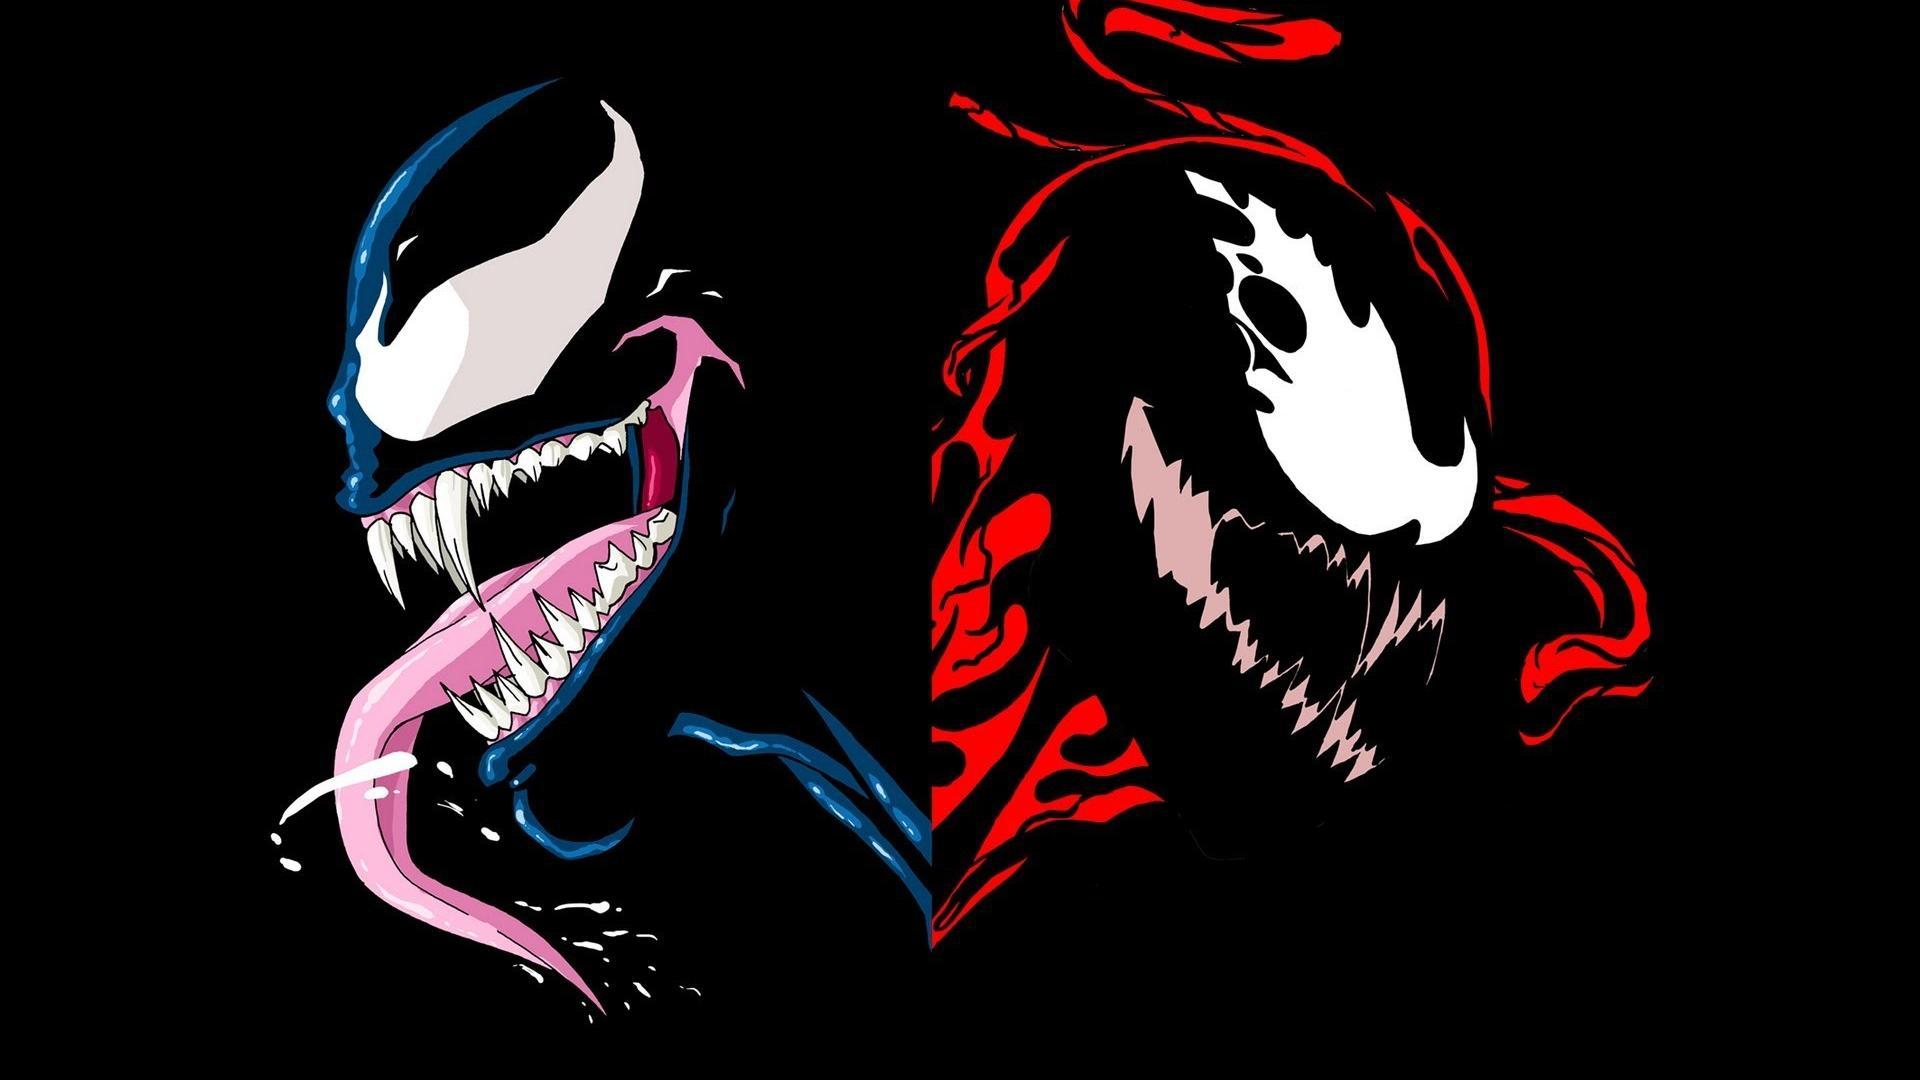 Spiderman and venom wallpapers Gallery.